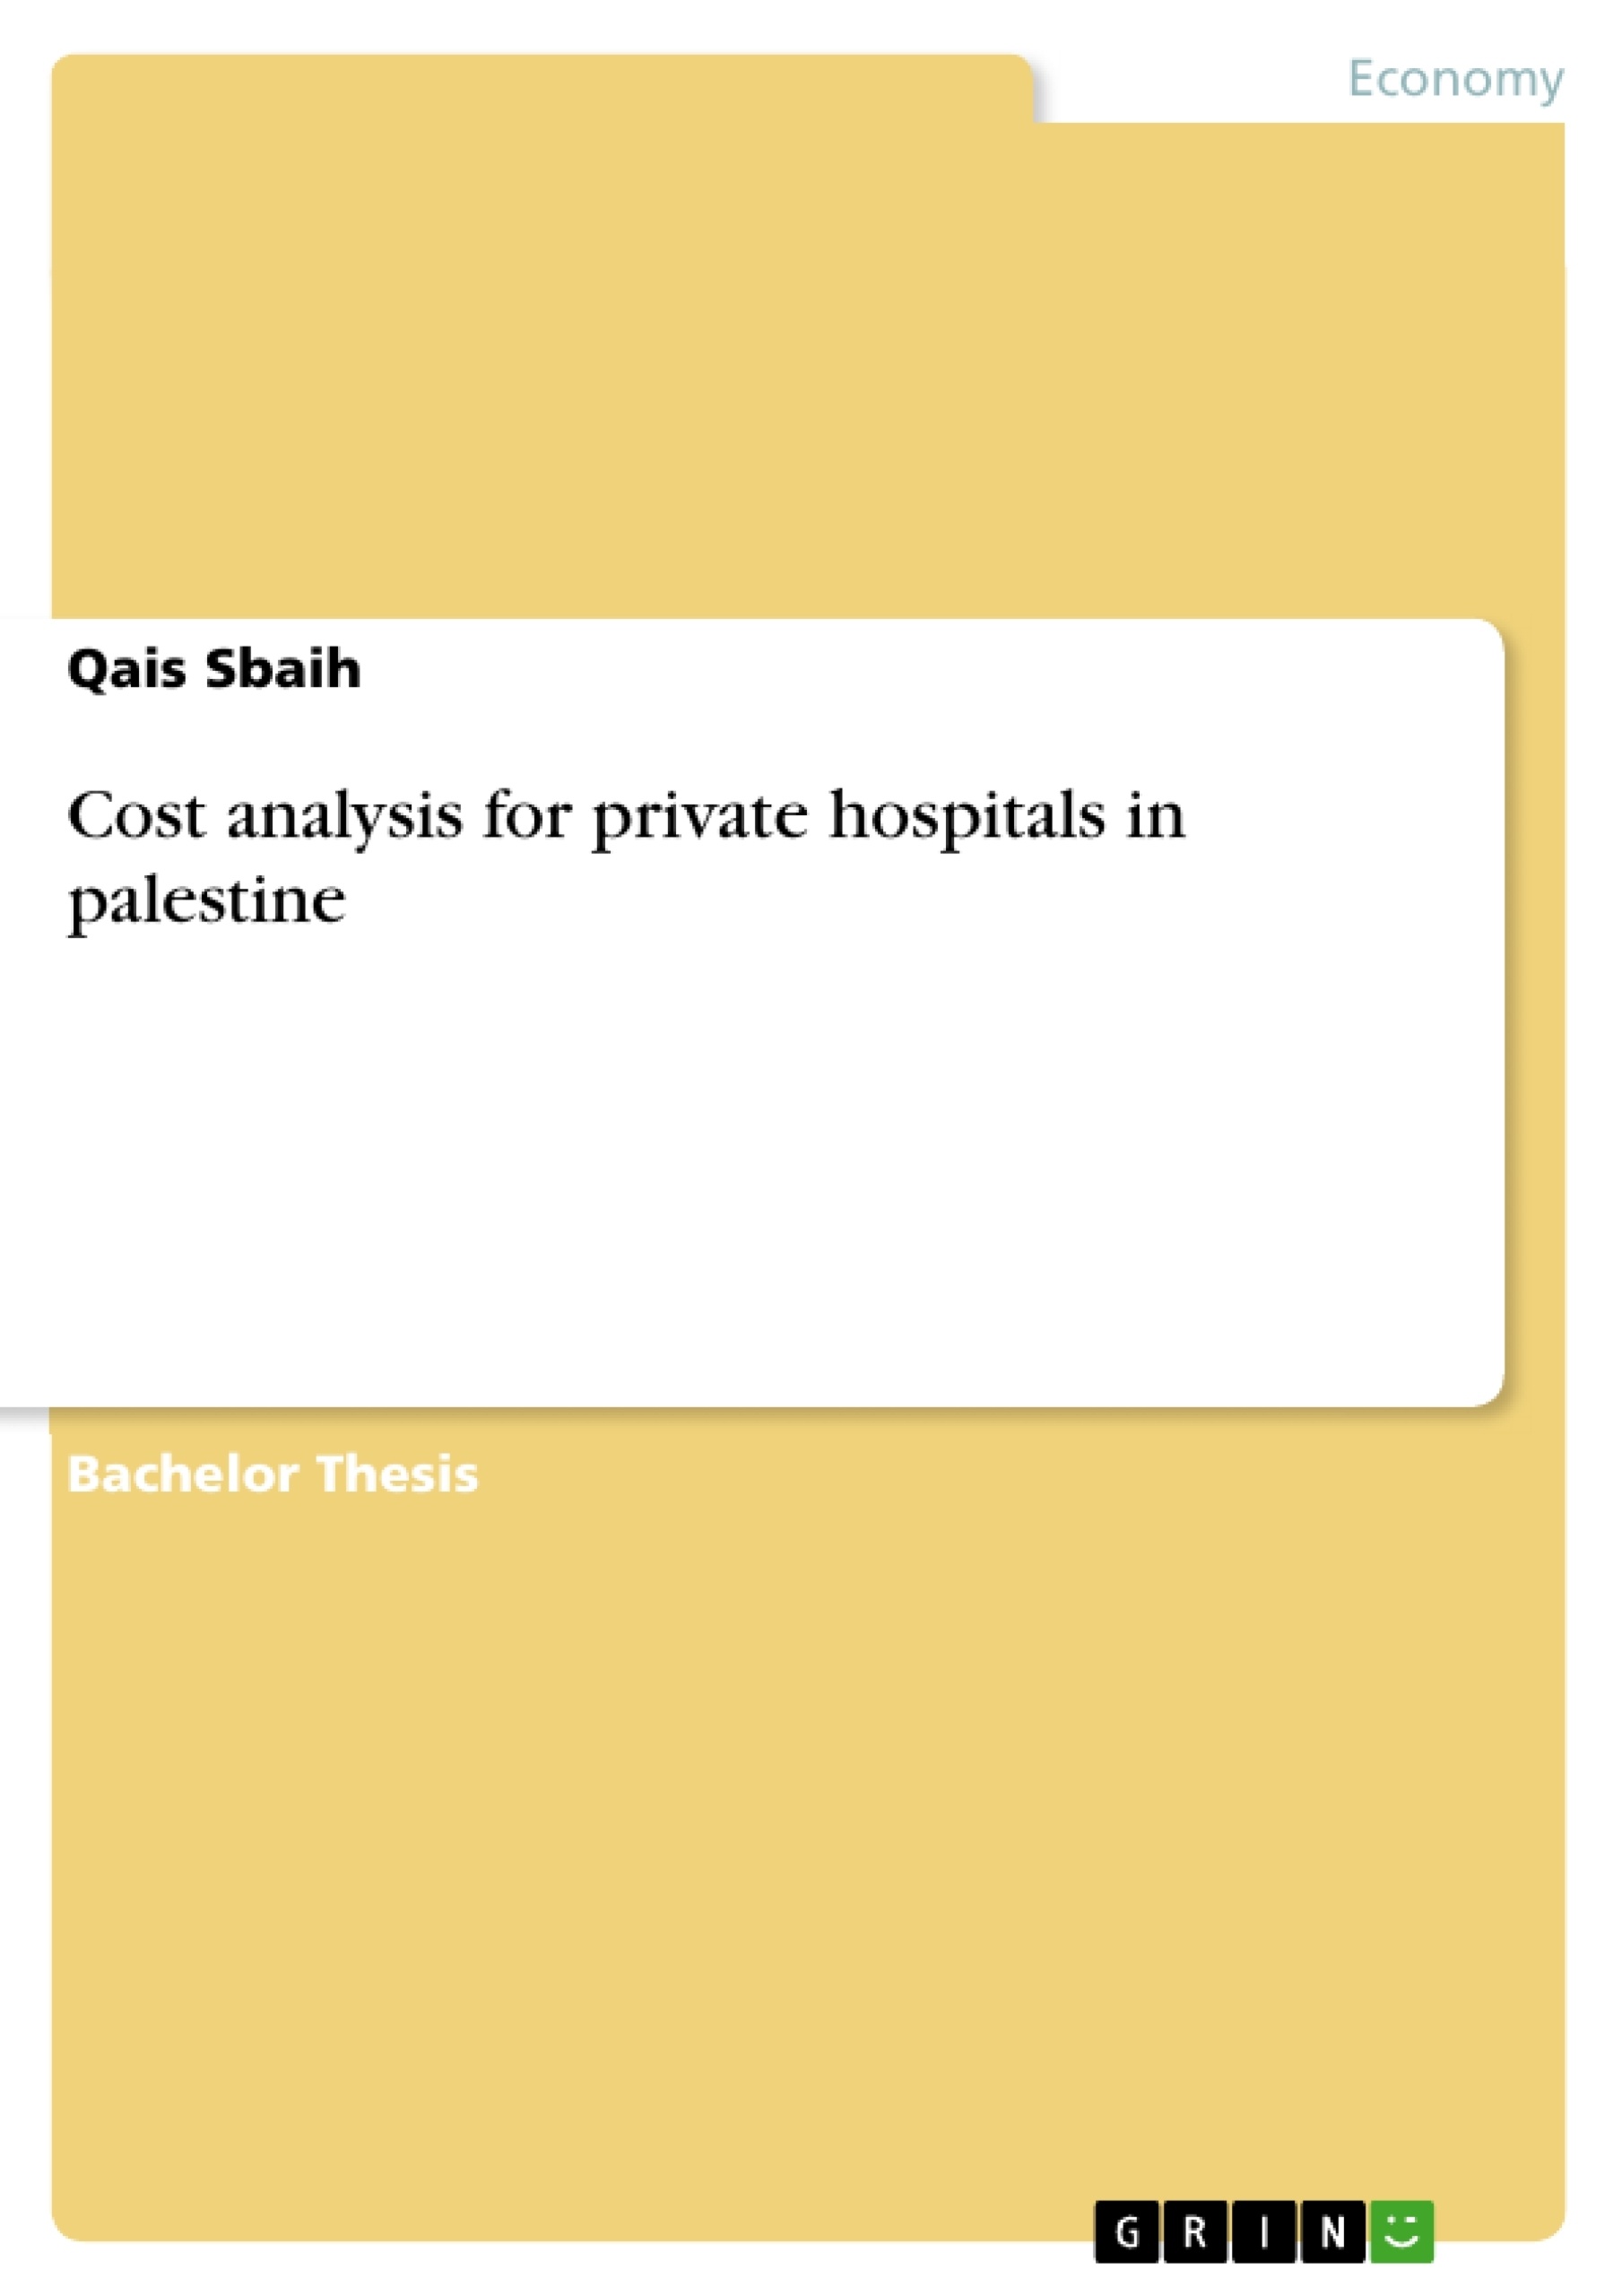 Titre: Cost analysis for private hospitals in palestine